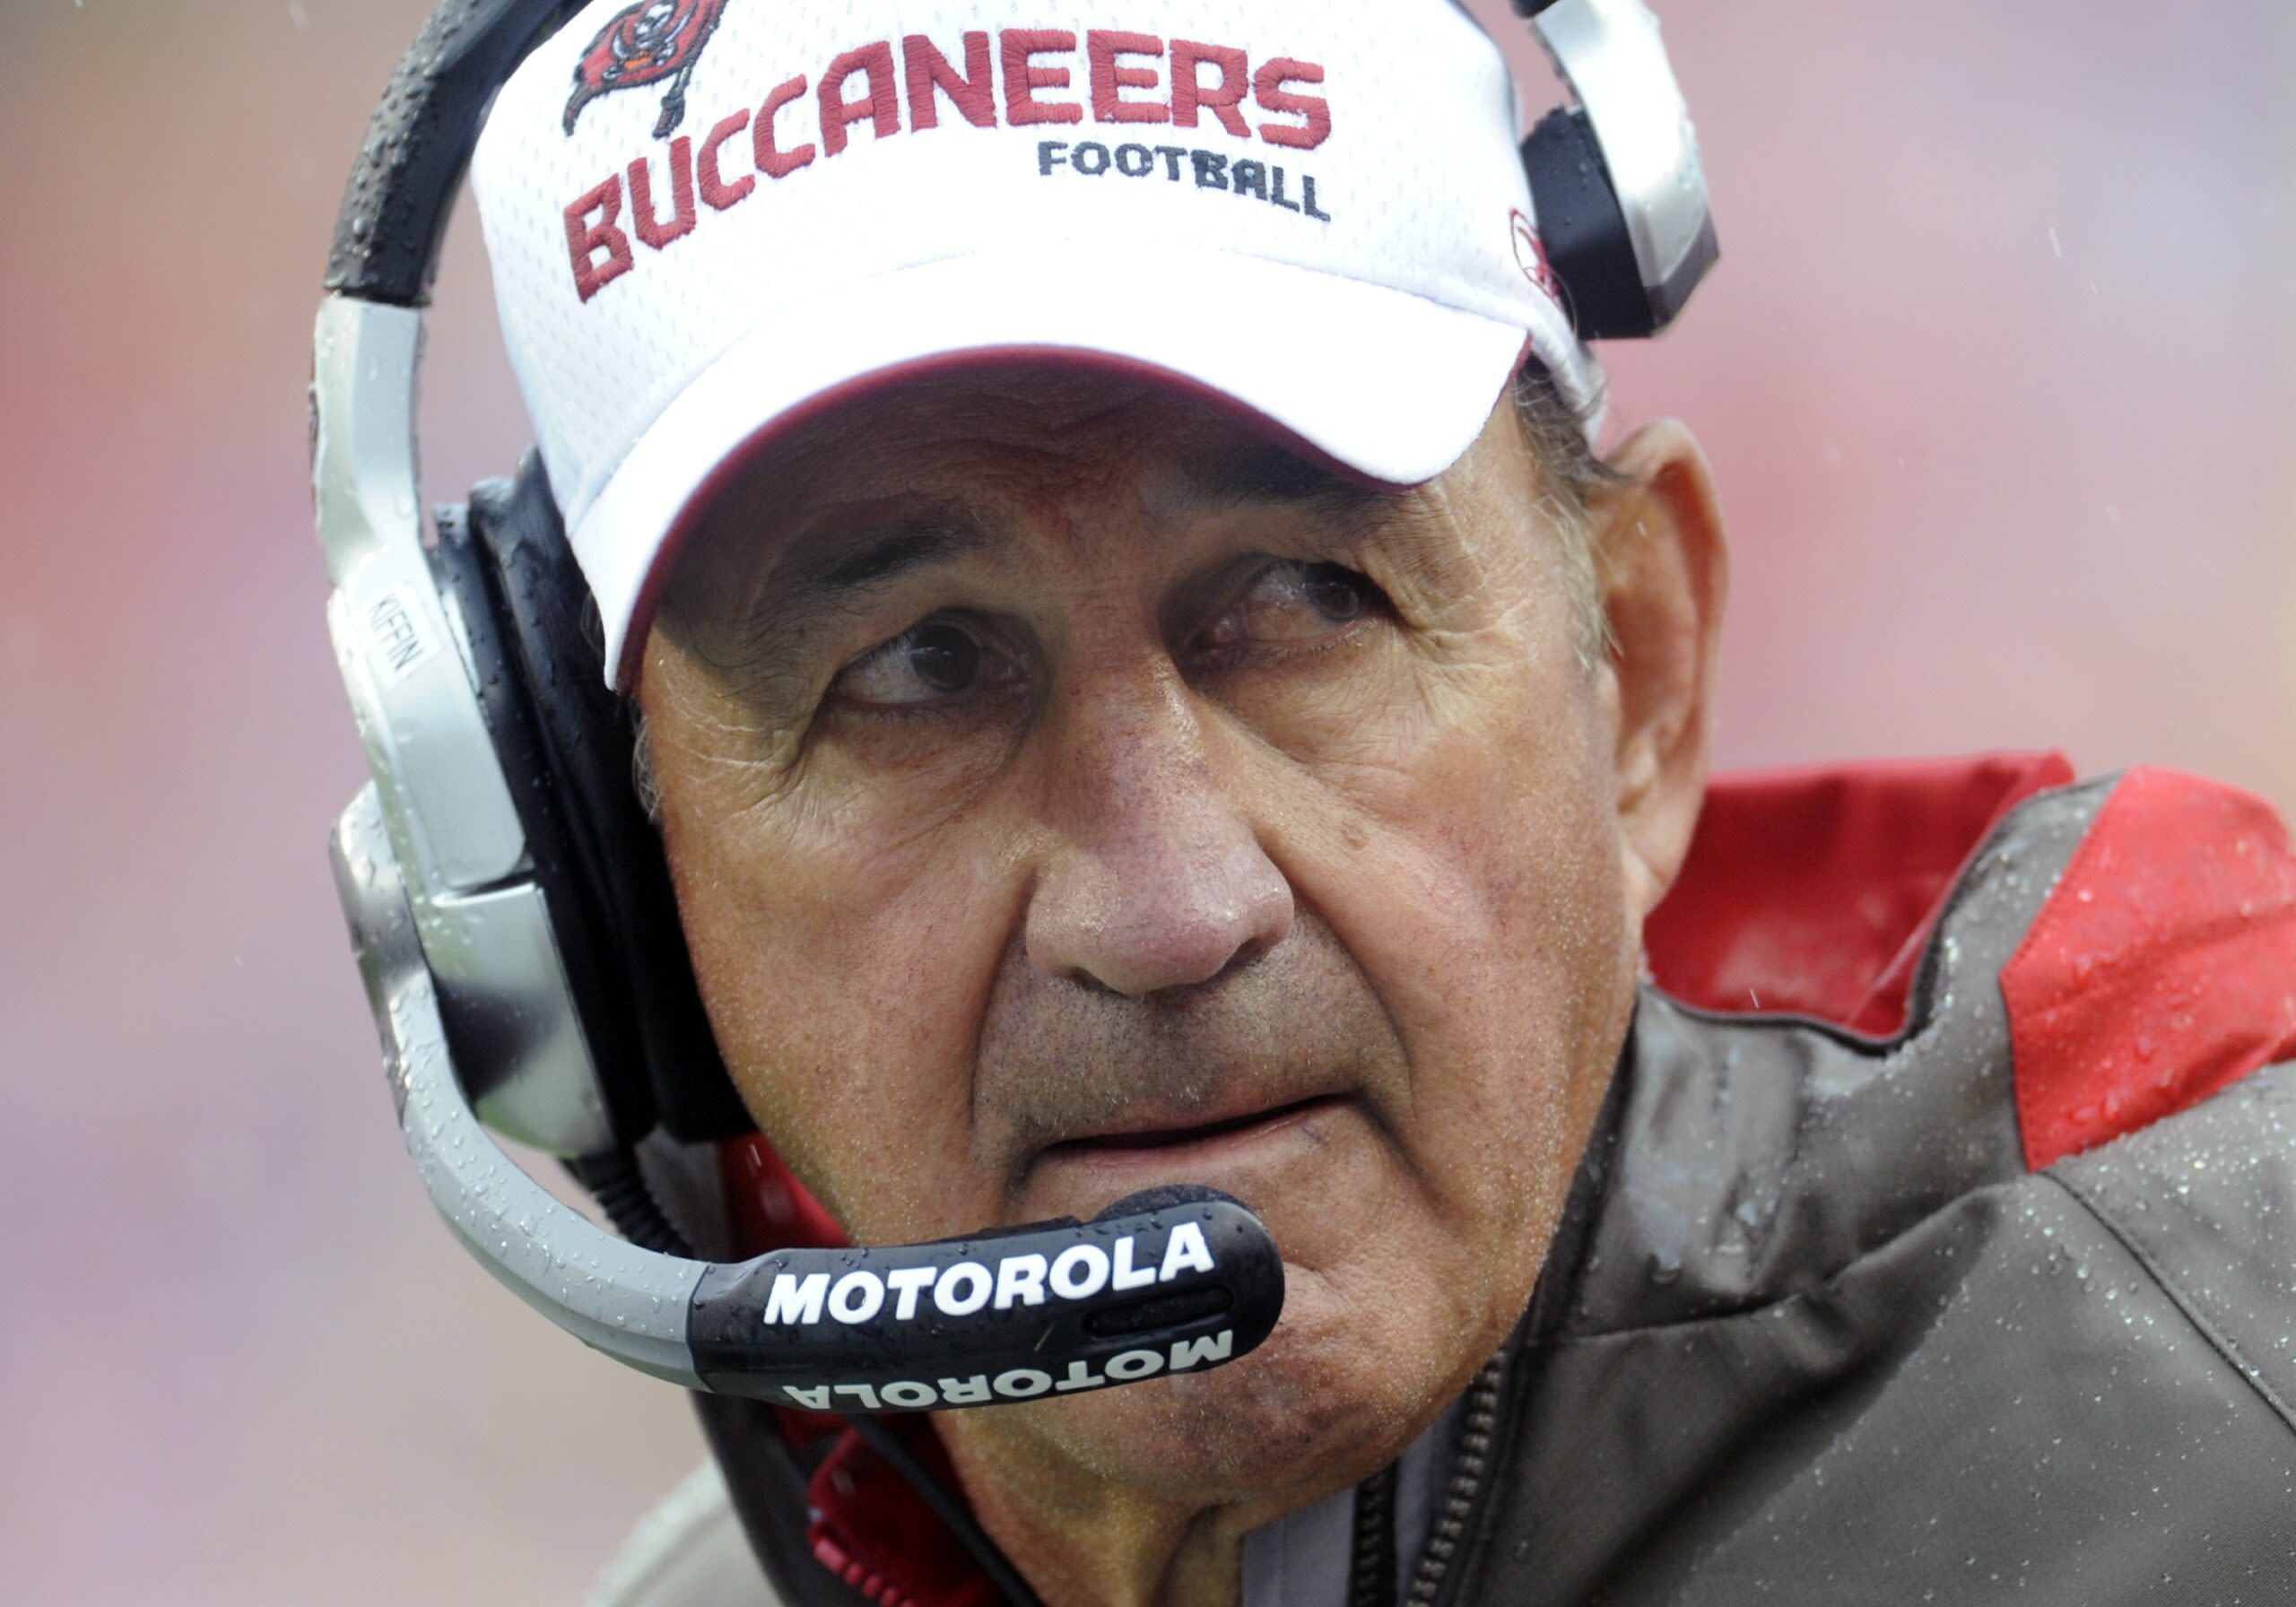 The legend of Monte Kiffin and the ‘Tampa 2’ defense